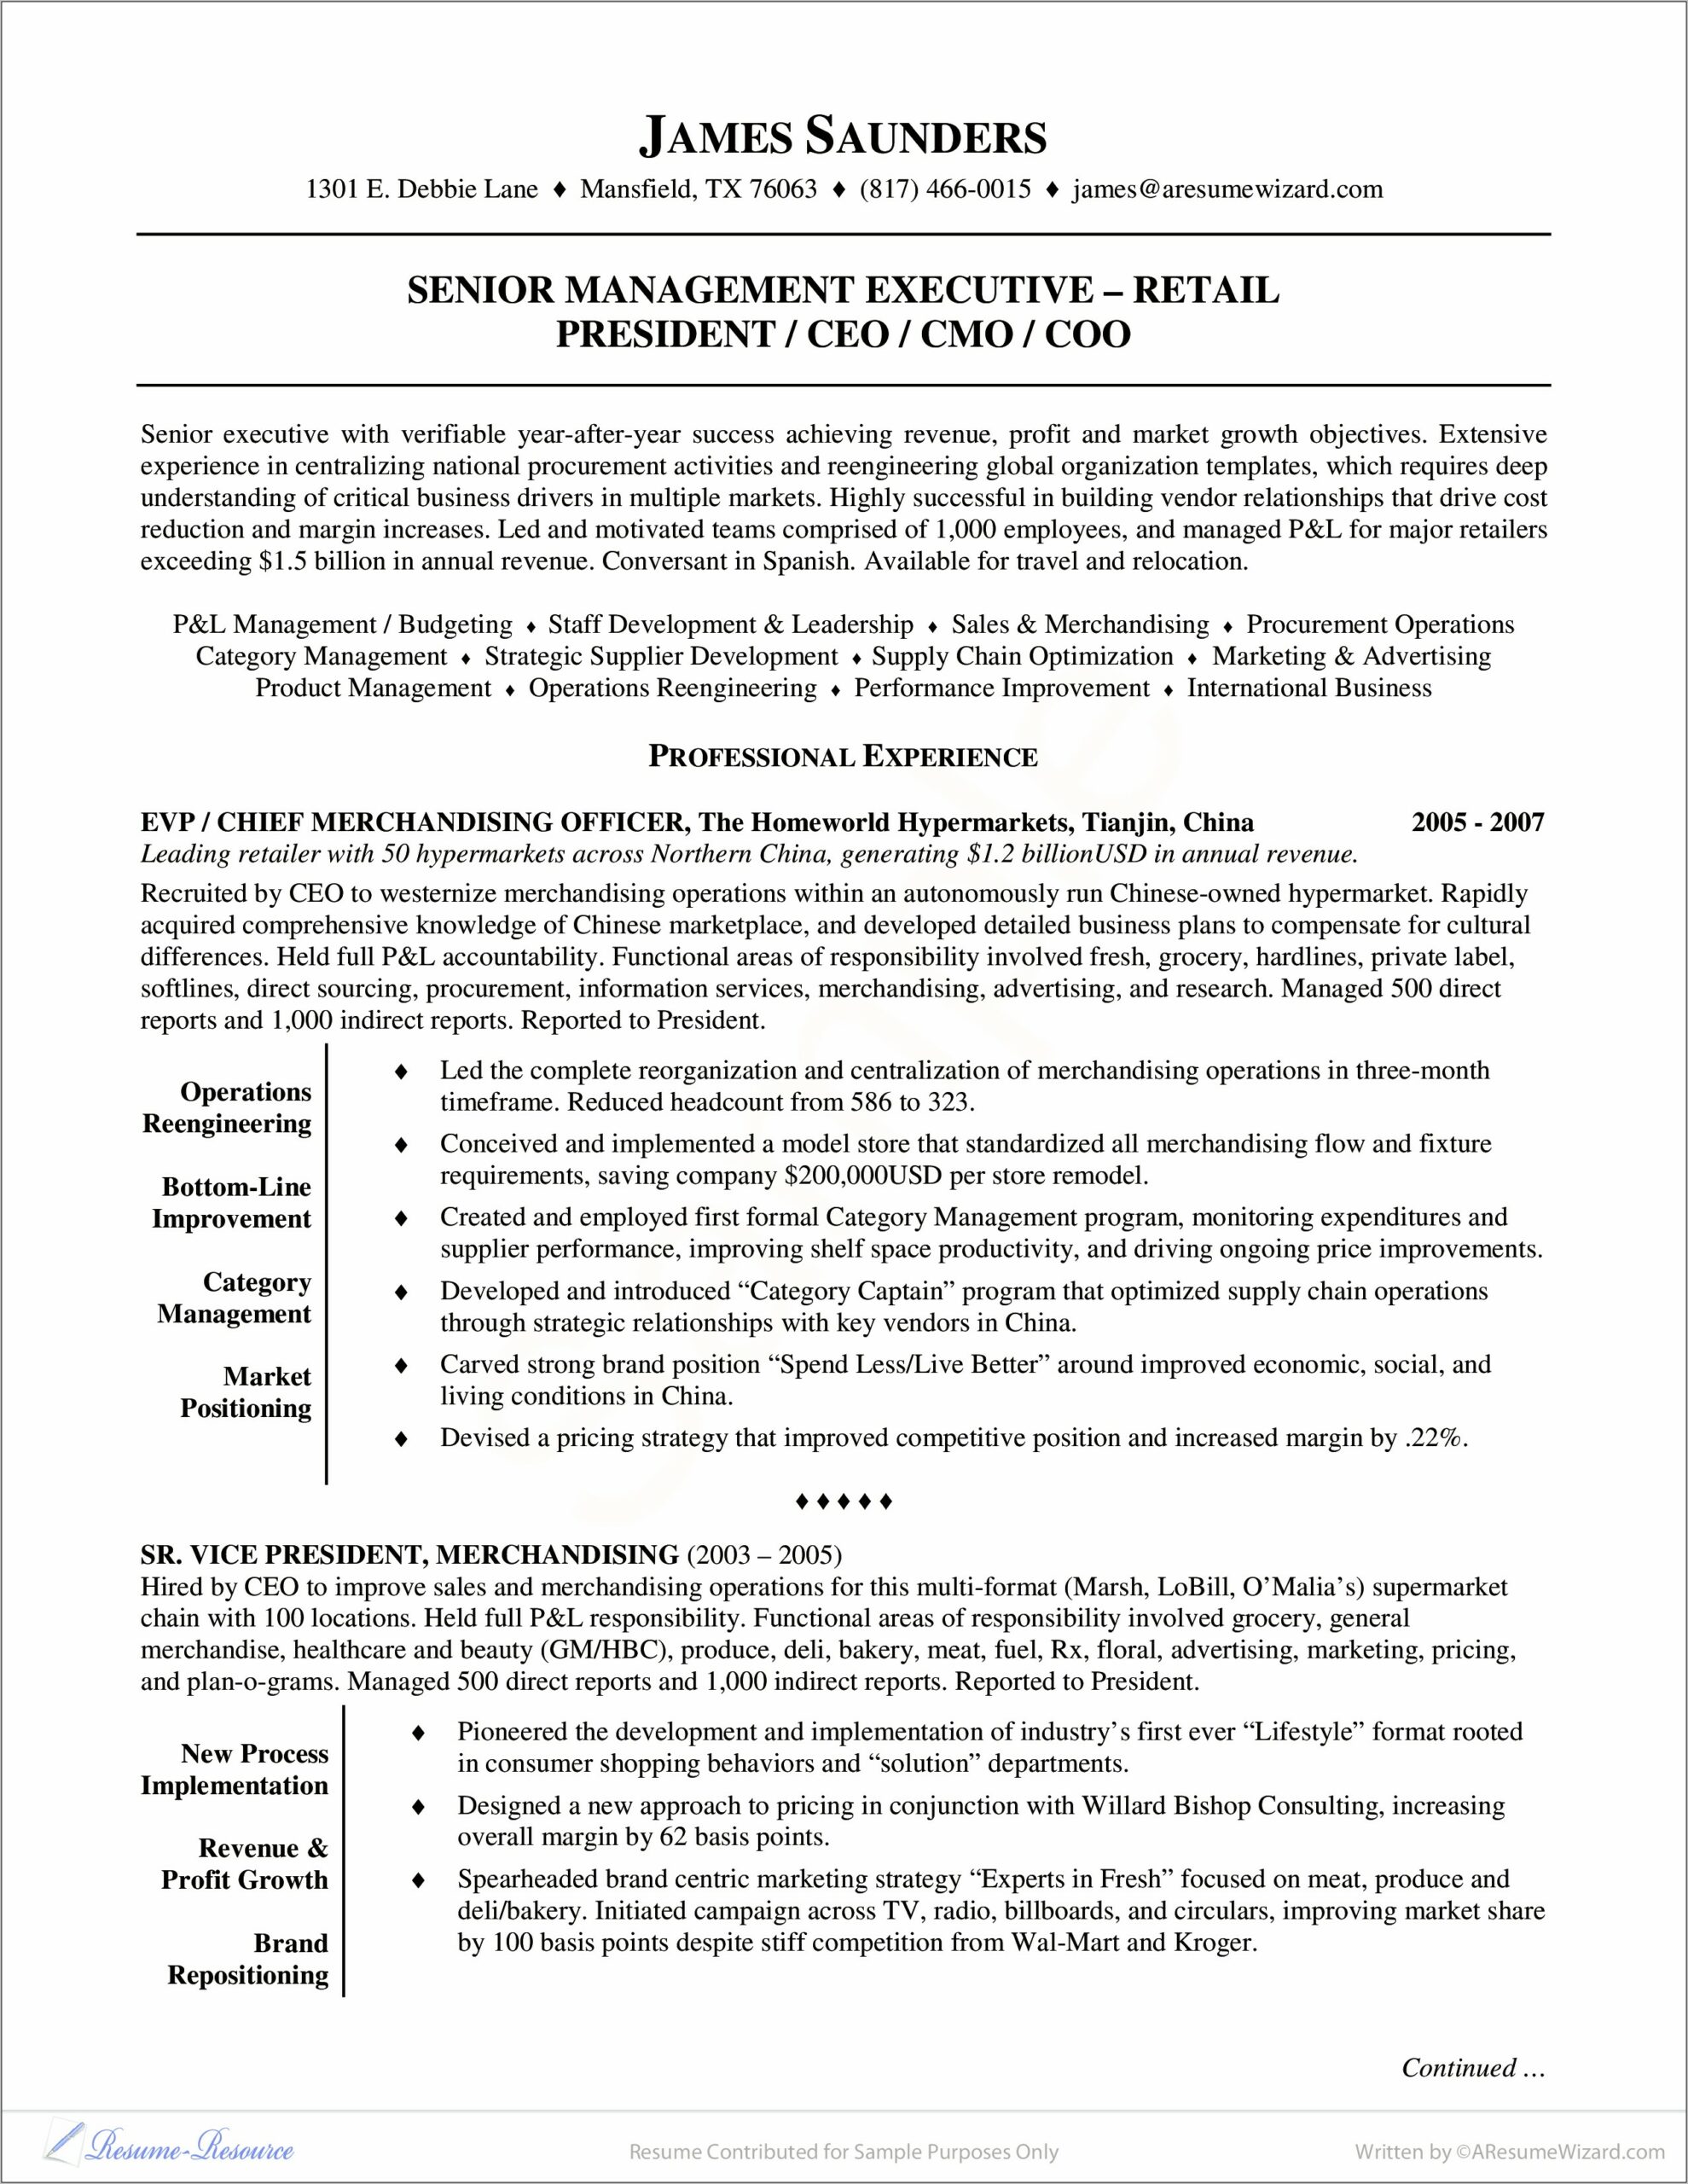 Examples Of Resume Summary For Retail